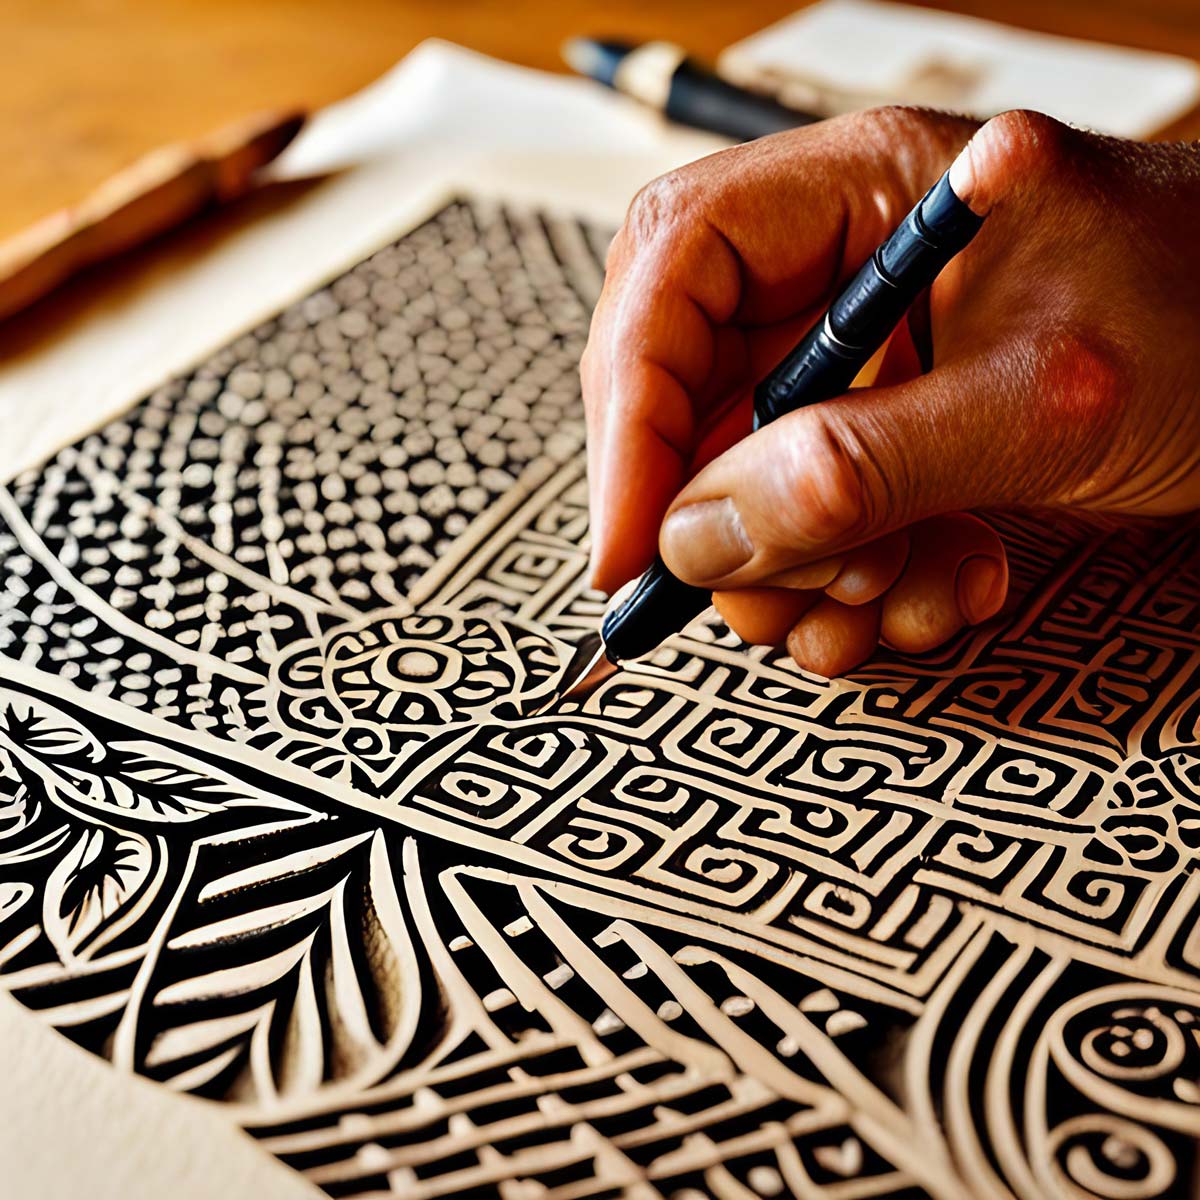 An Introduction to Block Printing